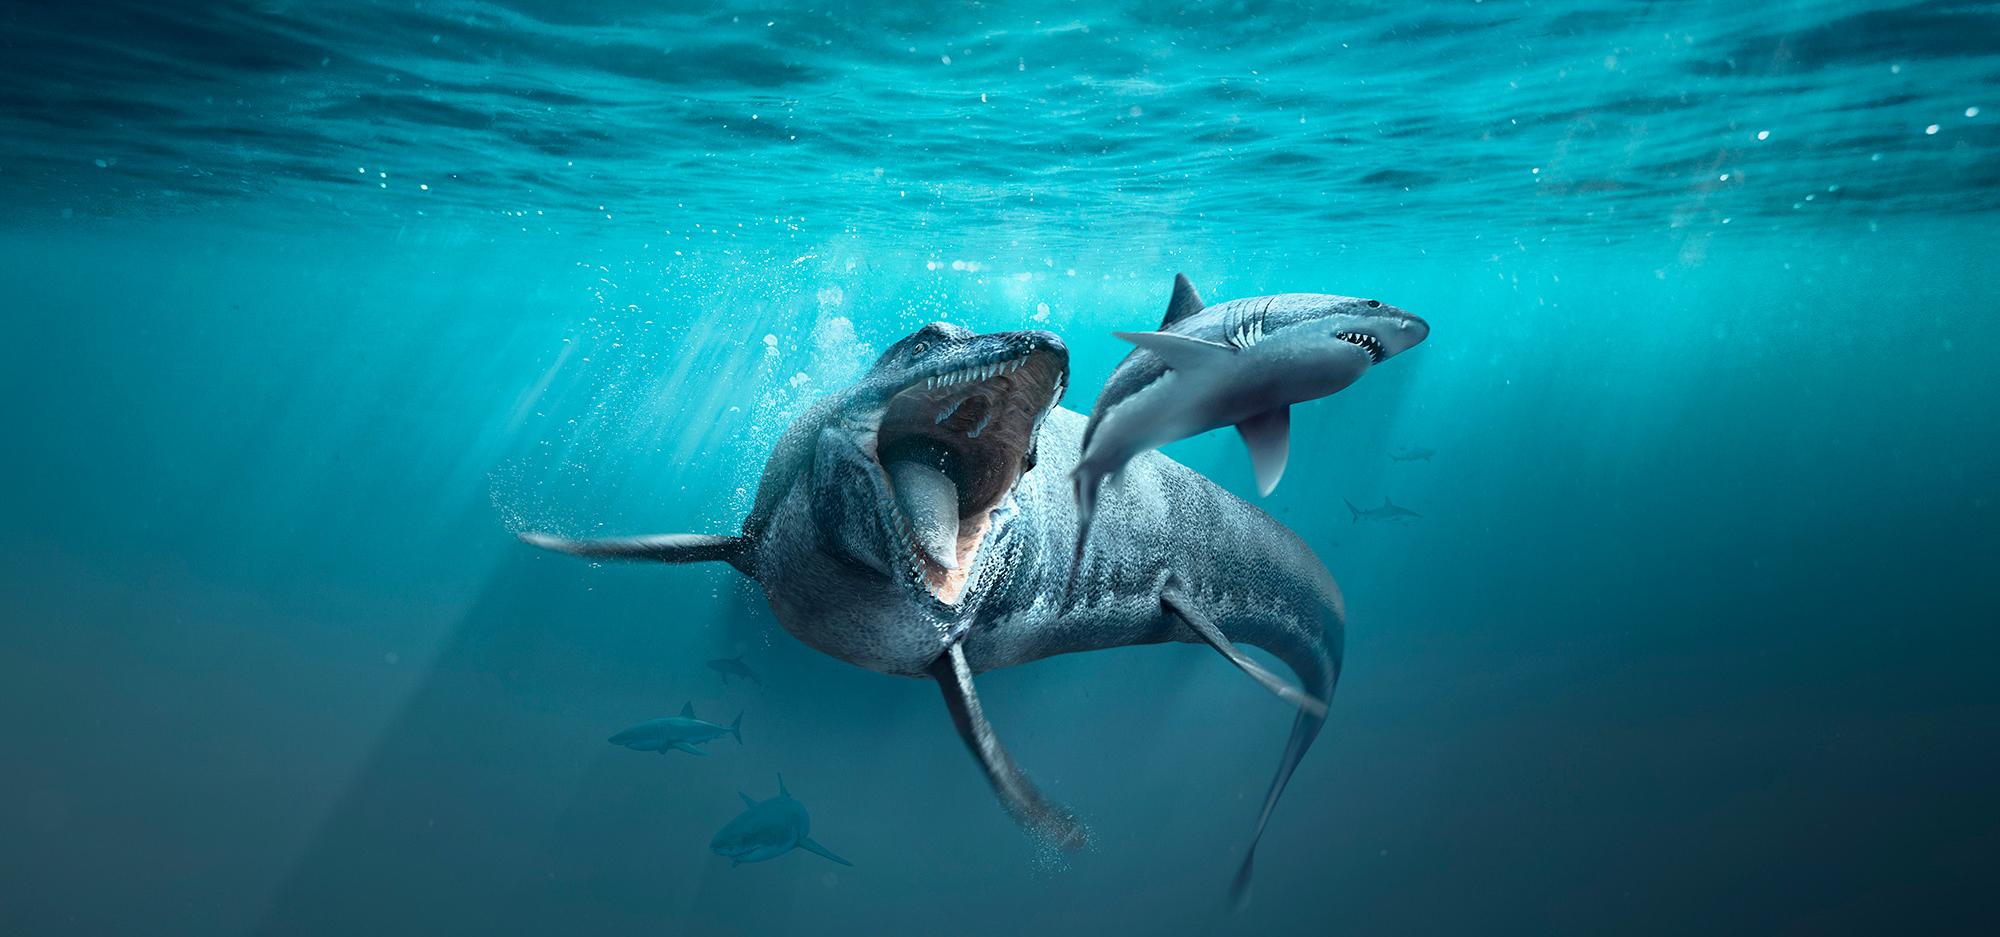 An underwater illustration of a huge sea monster preying on a shark